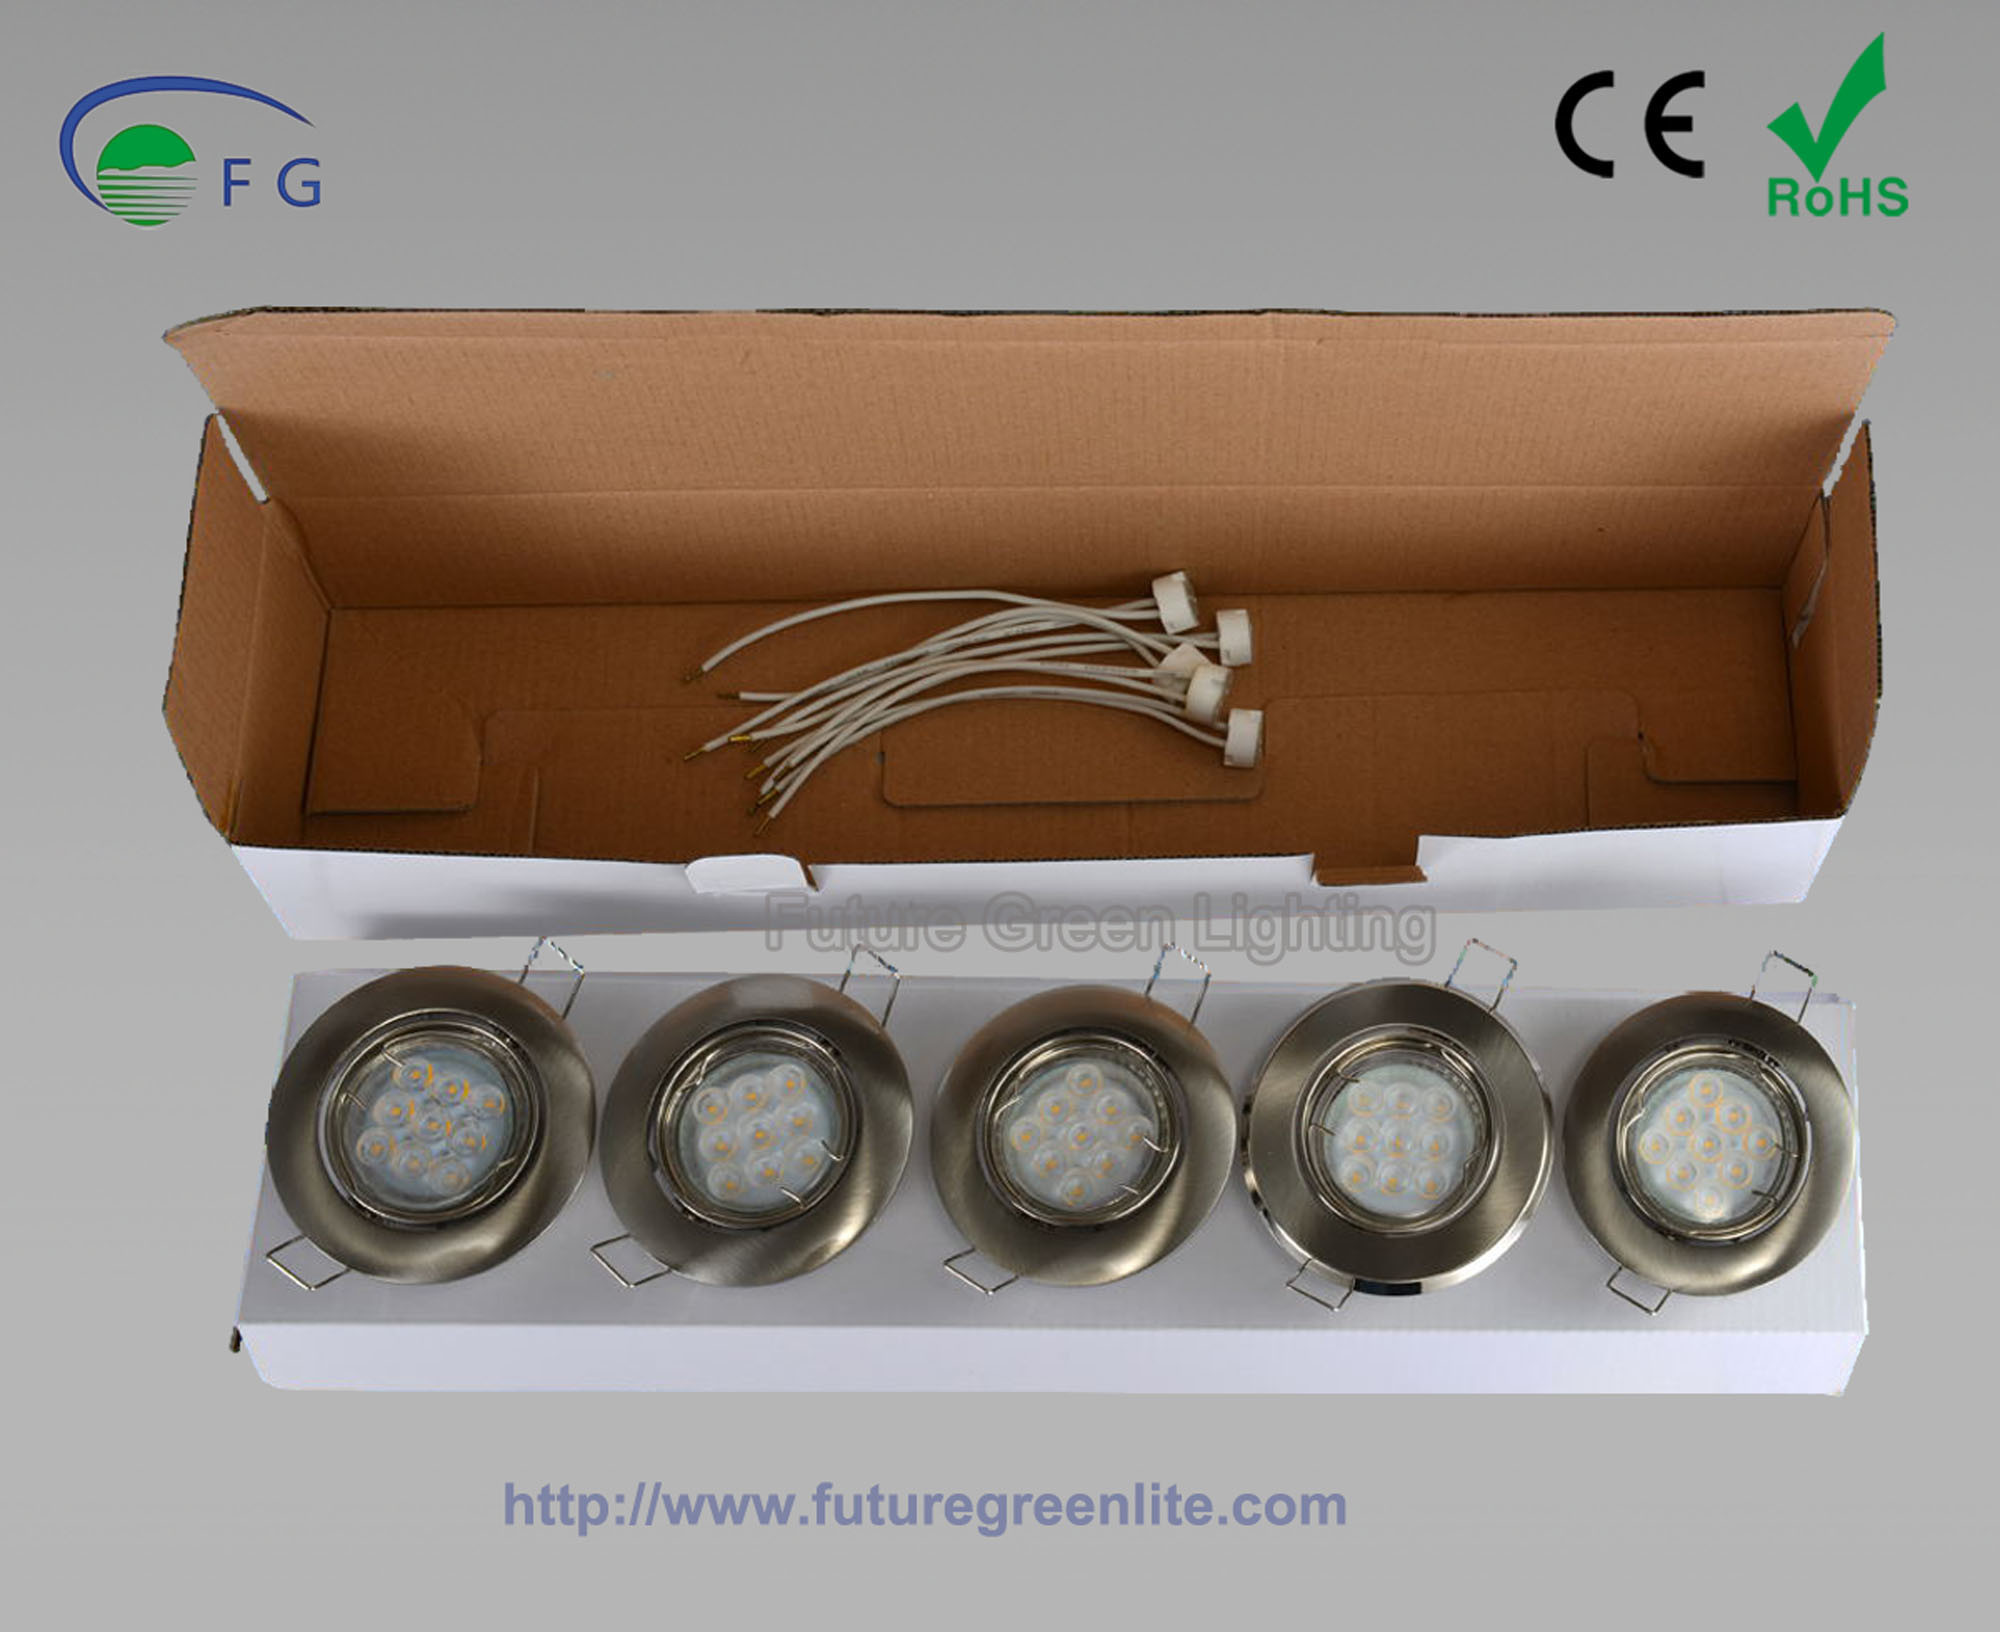 CE, RoHS Approved LED MR16 Ceiling Down Light Fixture